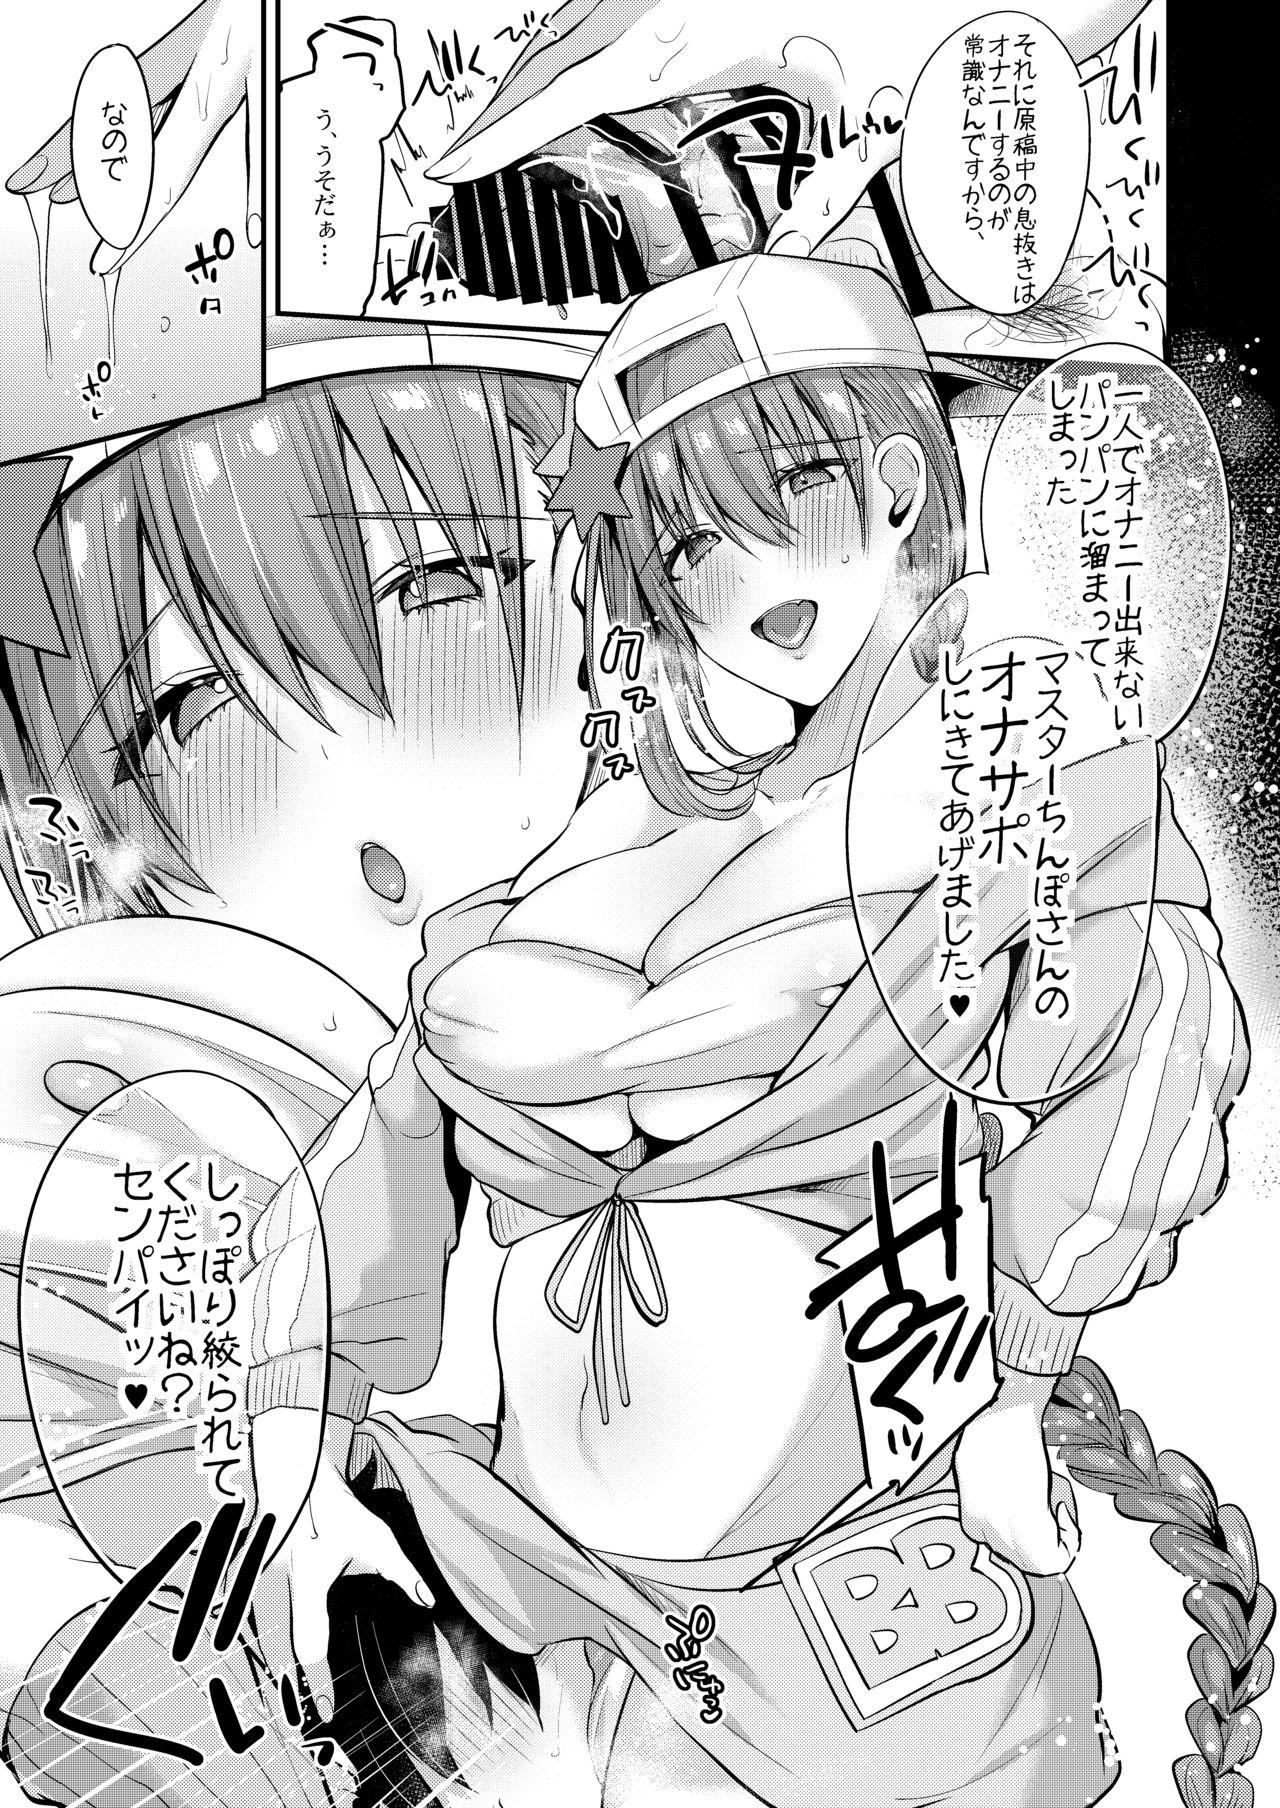 Ladyboy Forever - Fate grand order Gayclips - Page 4